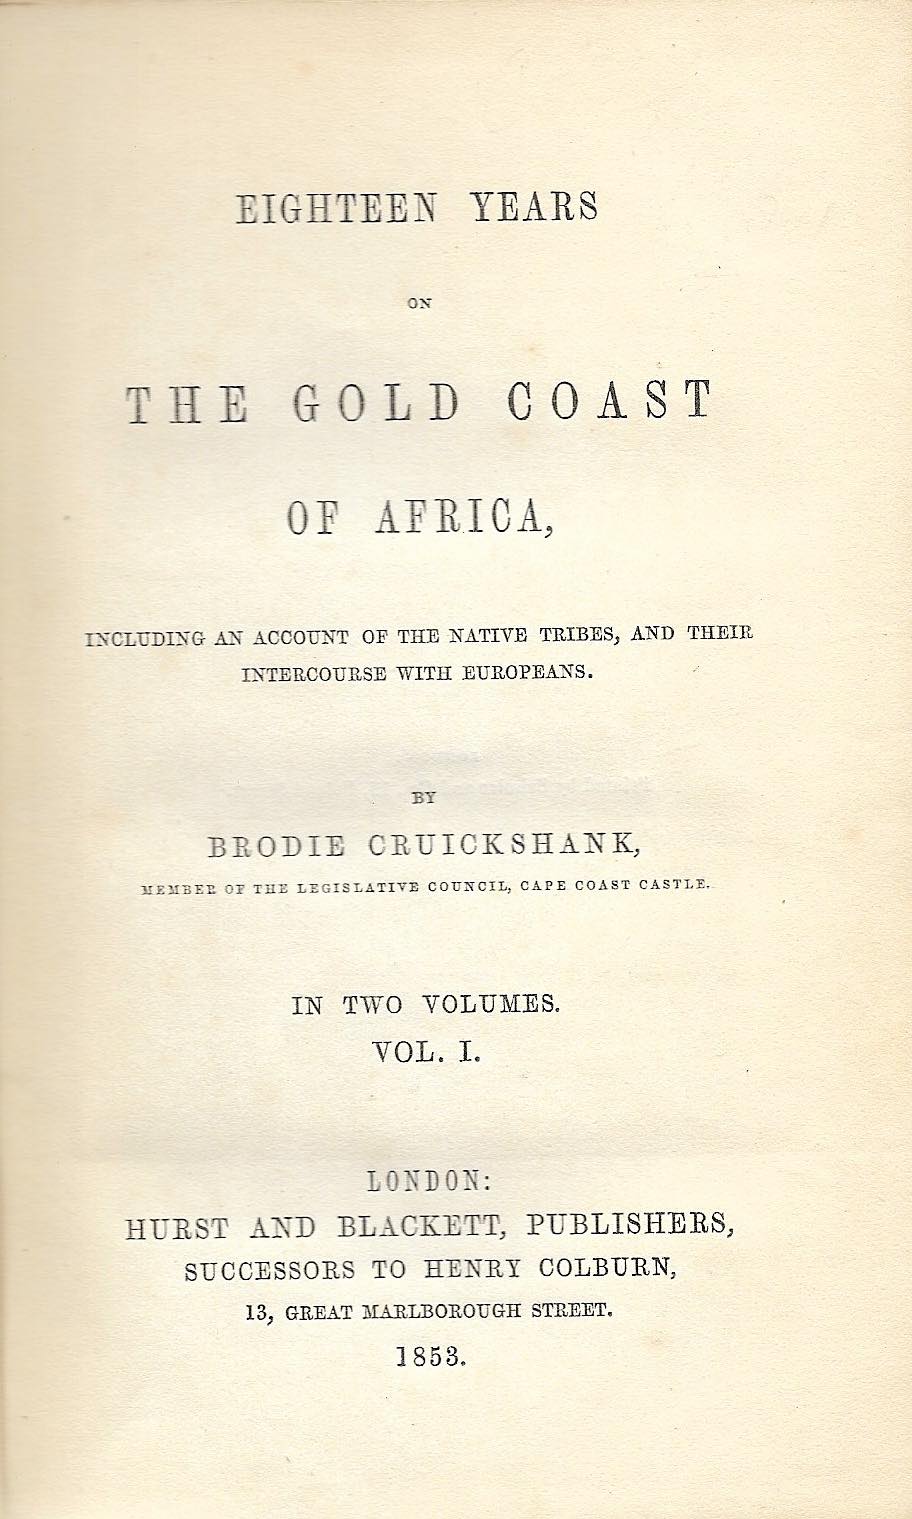 CRUICKSHANK, BRODIE: - Eighteen Years on the Gold Coast of Africa. Including an Account of the Native Tribes, and their Intercourse with Europeans. Two volumes. London, Hurst and Blackett, 1853.